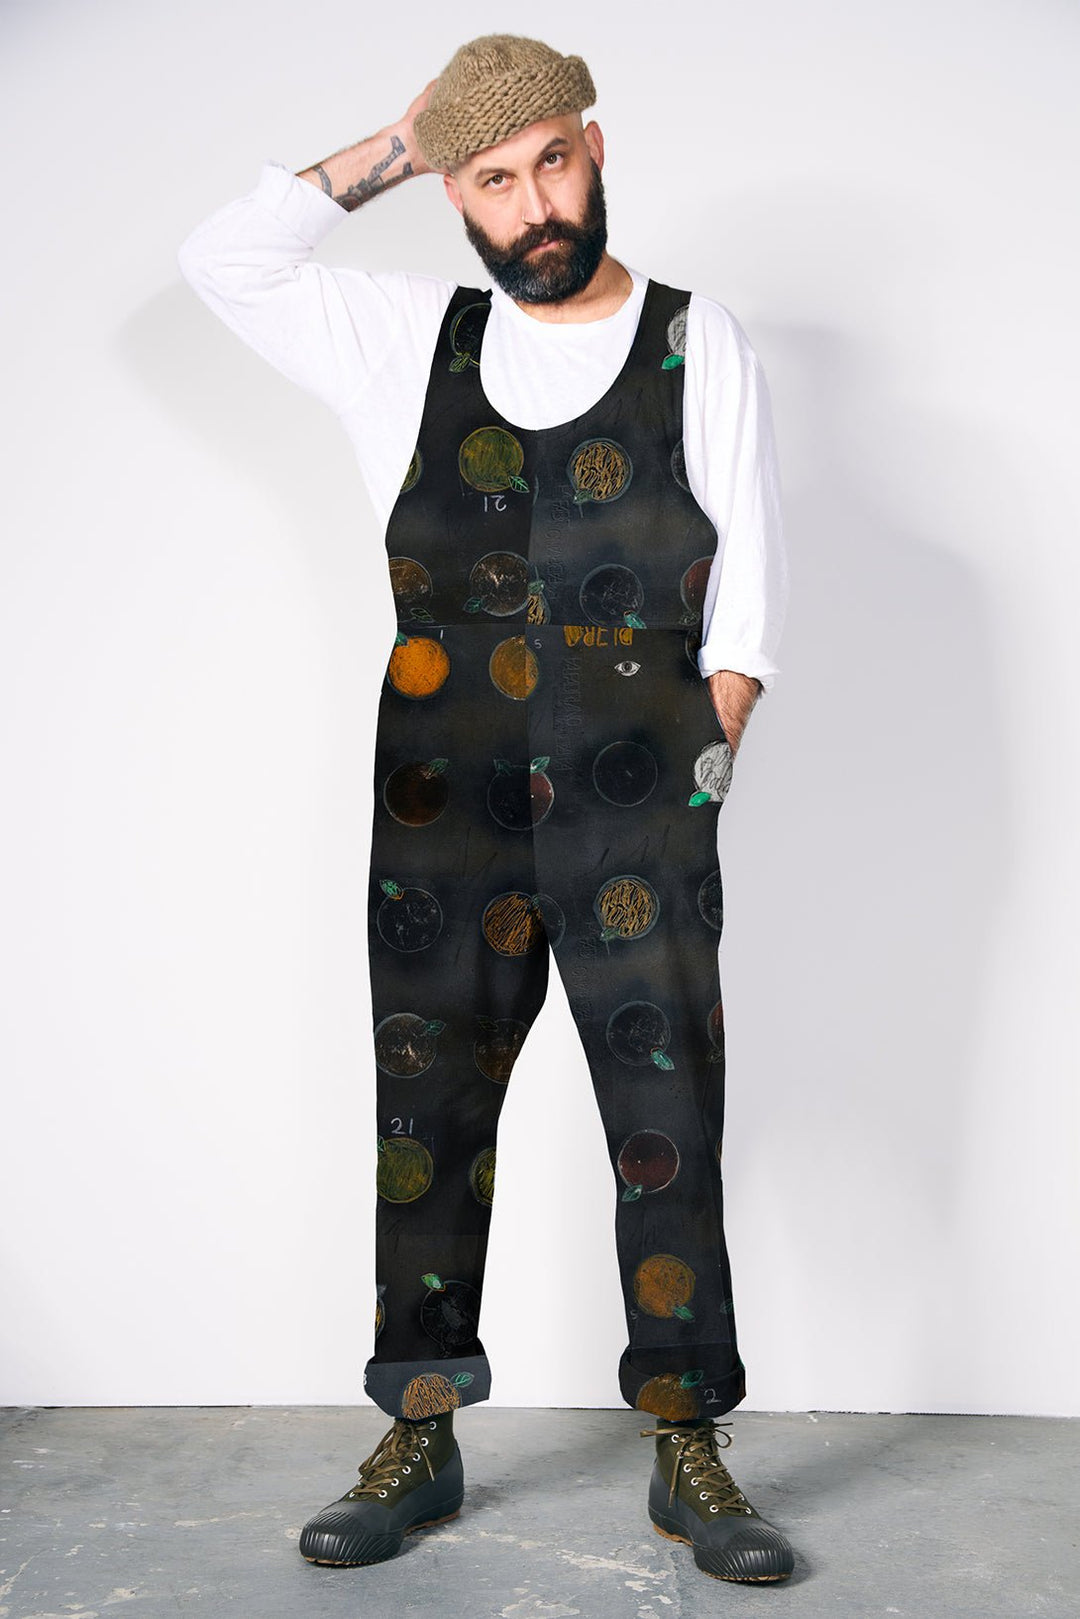 Clovelly adult dungarees [Piero x OA] - Over All 1516